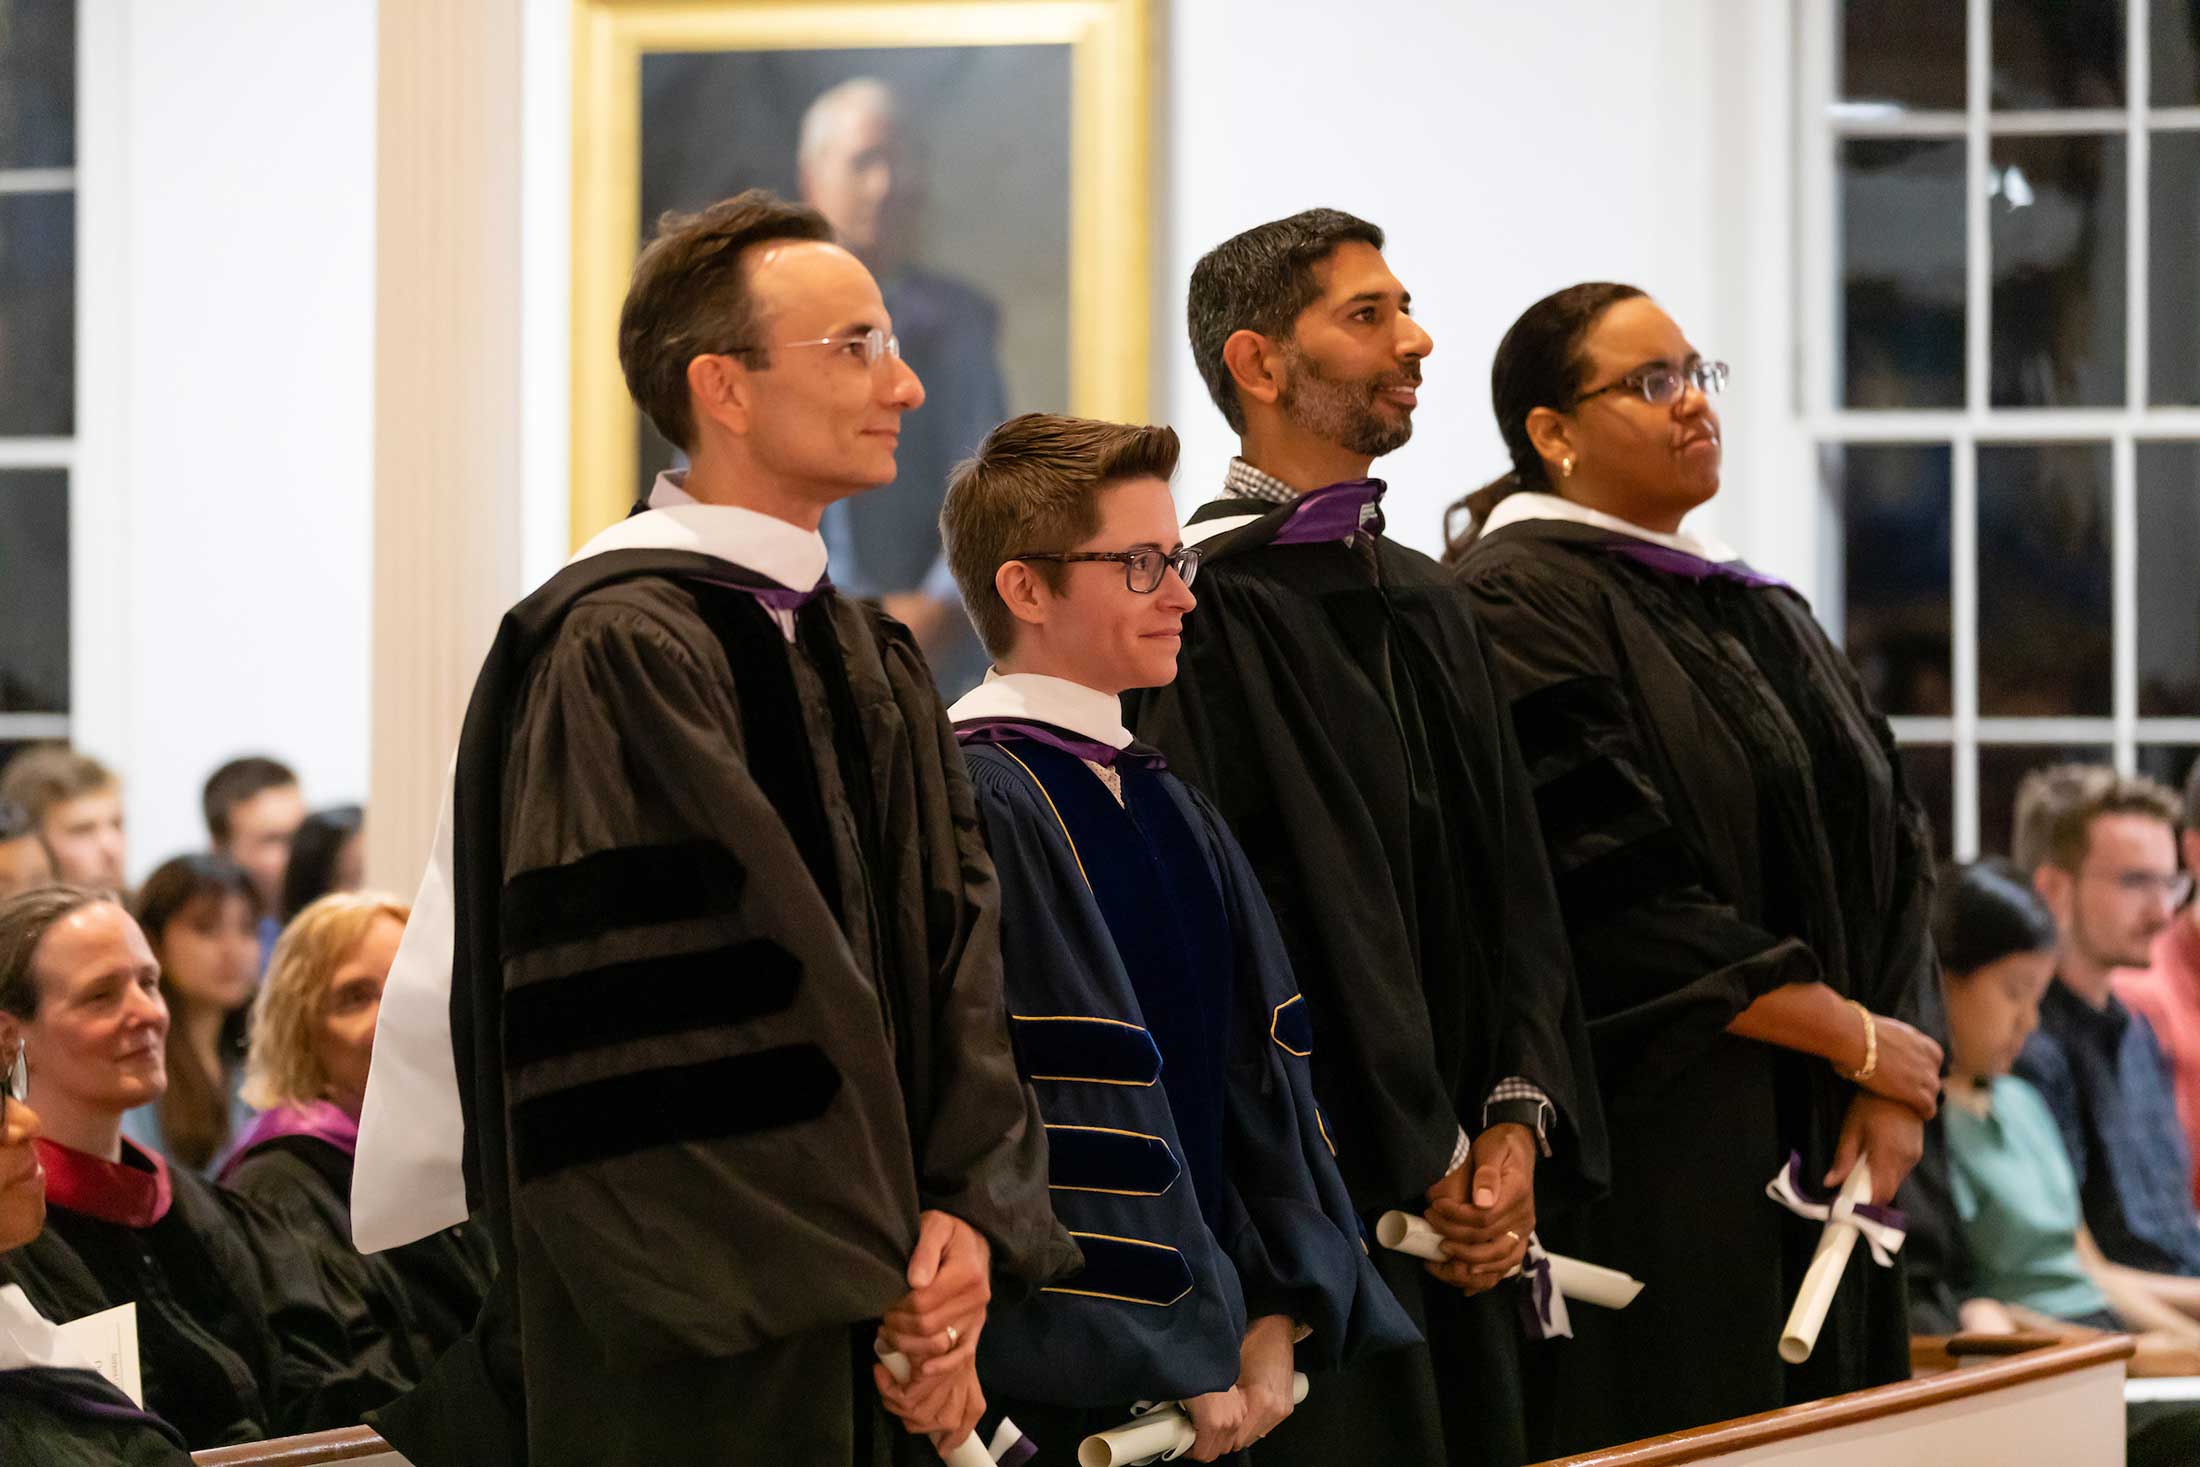 Four faculty receive honorary master's degrees during Convocation